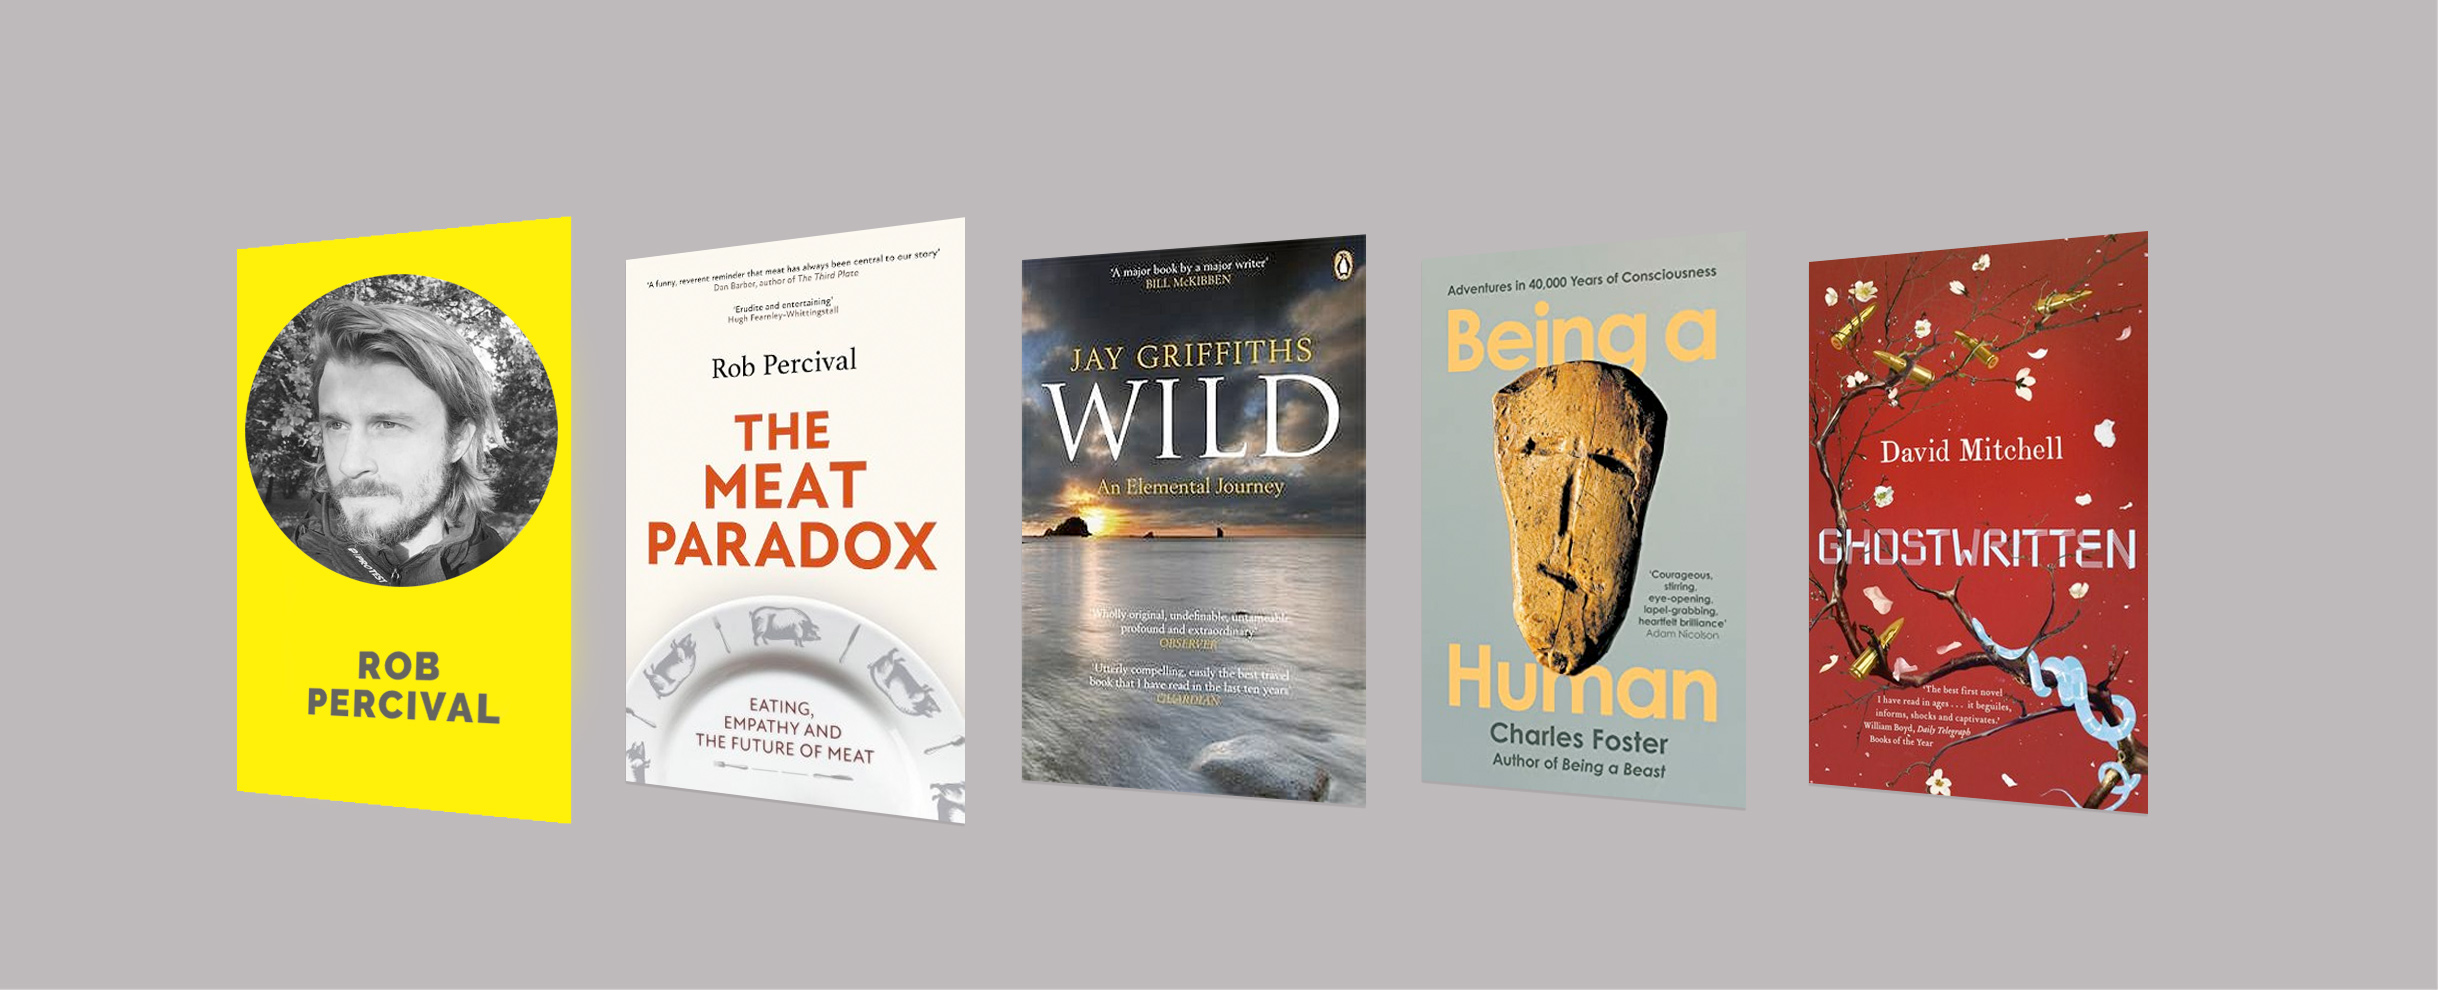 Rob Percival, author of The Meat Paradox: Eating, Empathy, and the Future of Meat